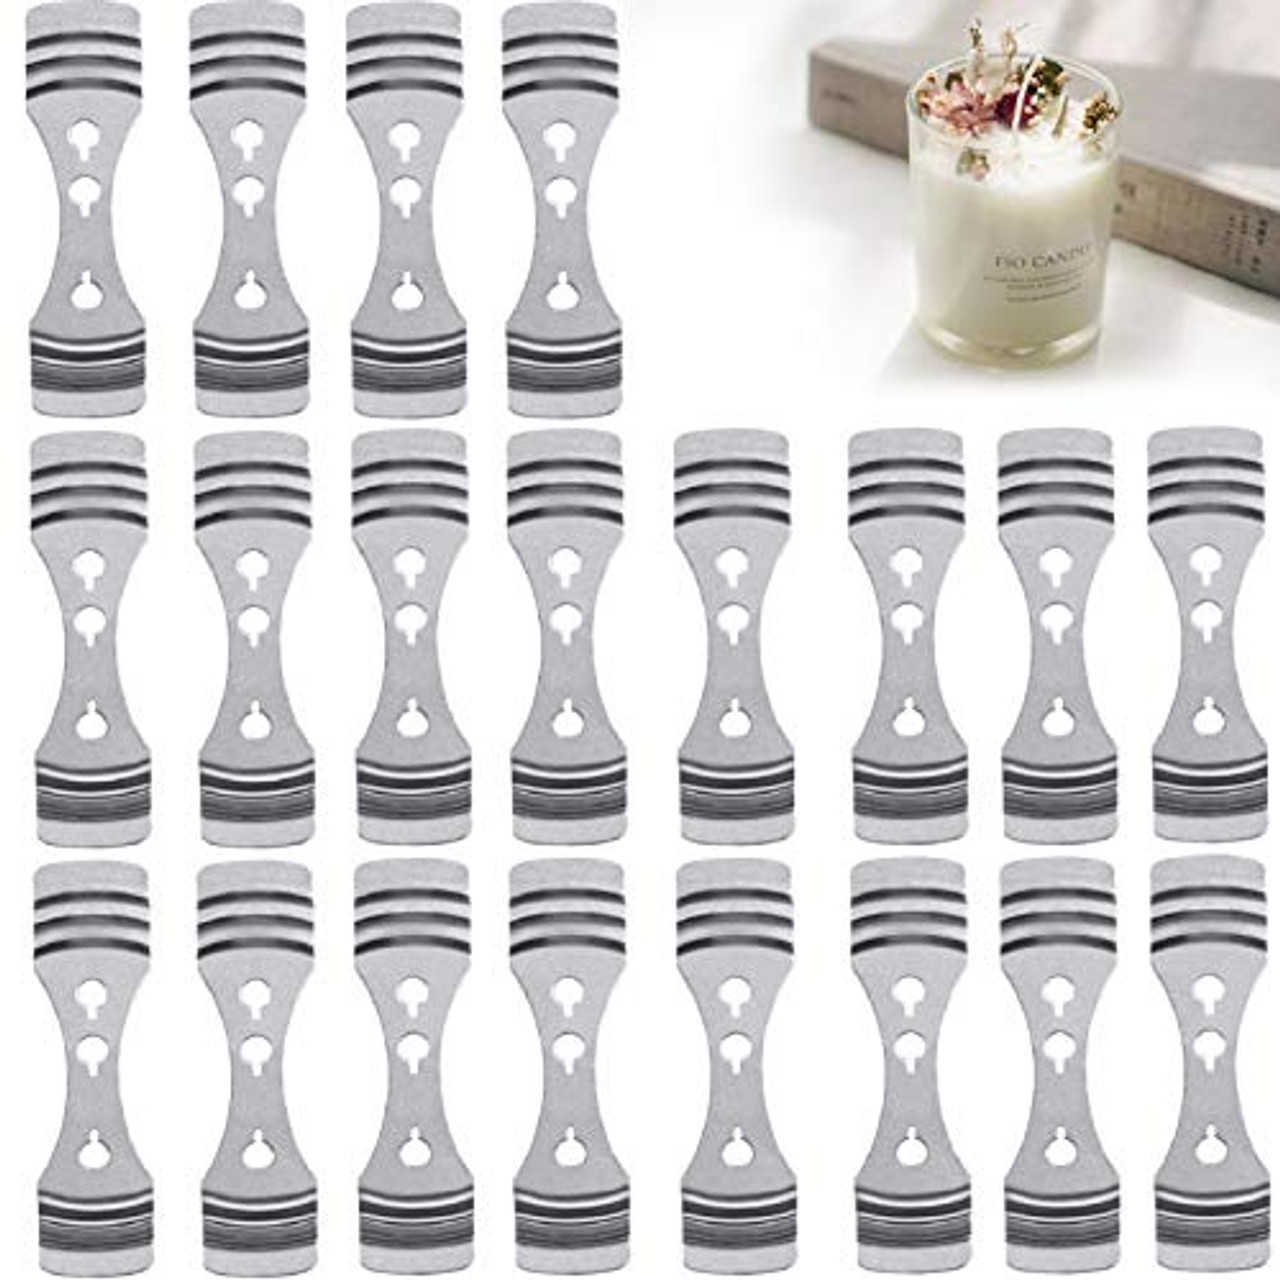 10pcs Metal Candle Wick Holders, Upgraded Candle Wick Centering Devices, Silver Stainless Steel Candle Wick Holder for Candle Making